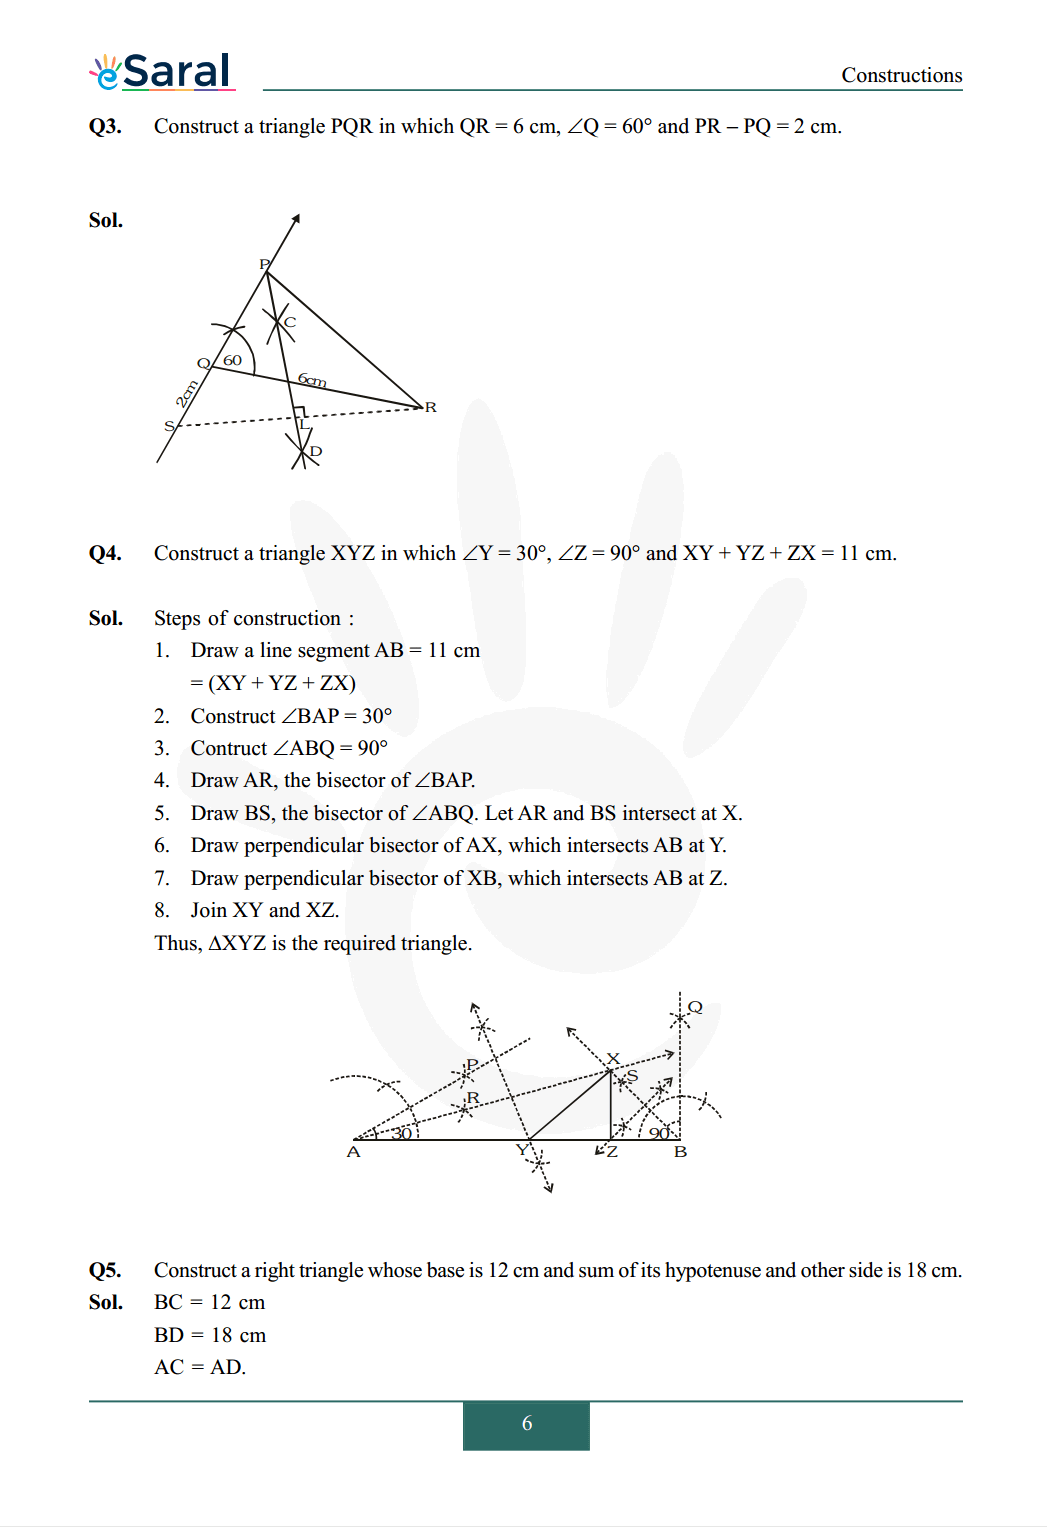 Class 9 maths chapter 11 exercise 11.2 solutions Image 2